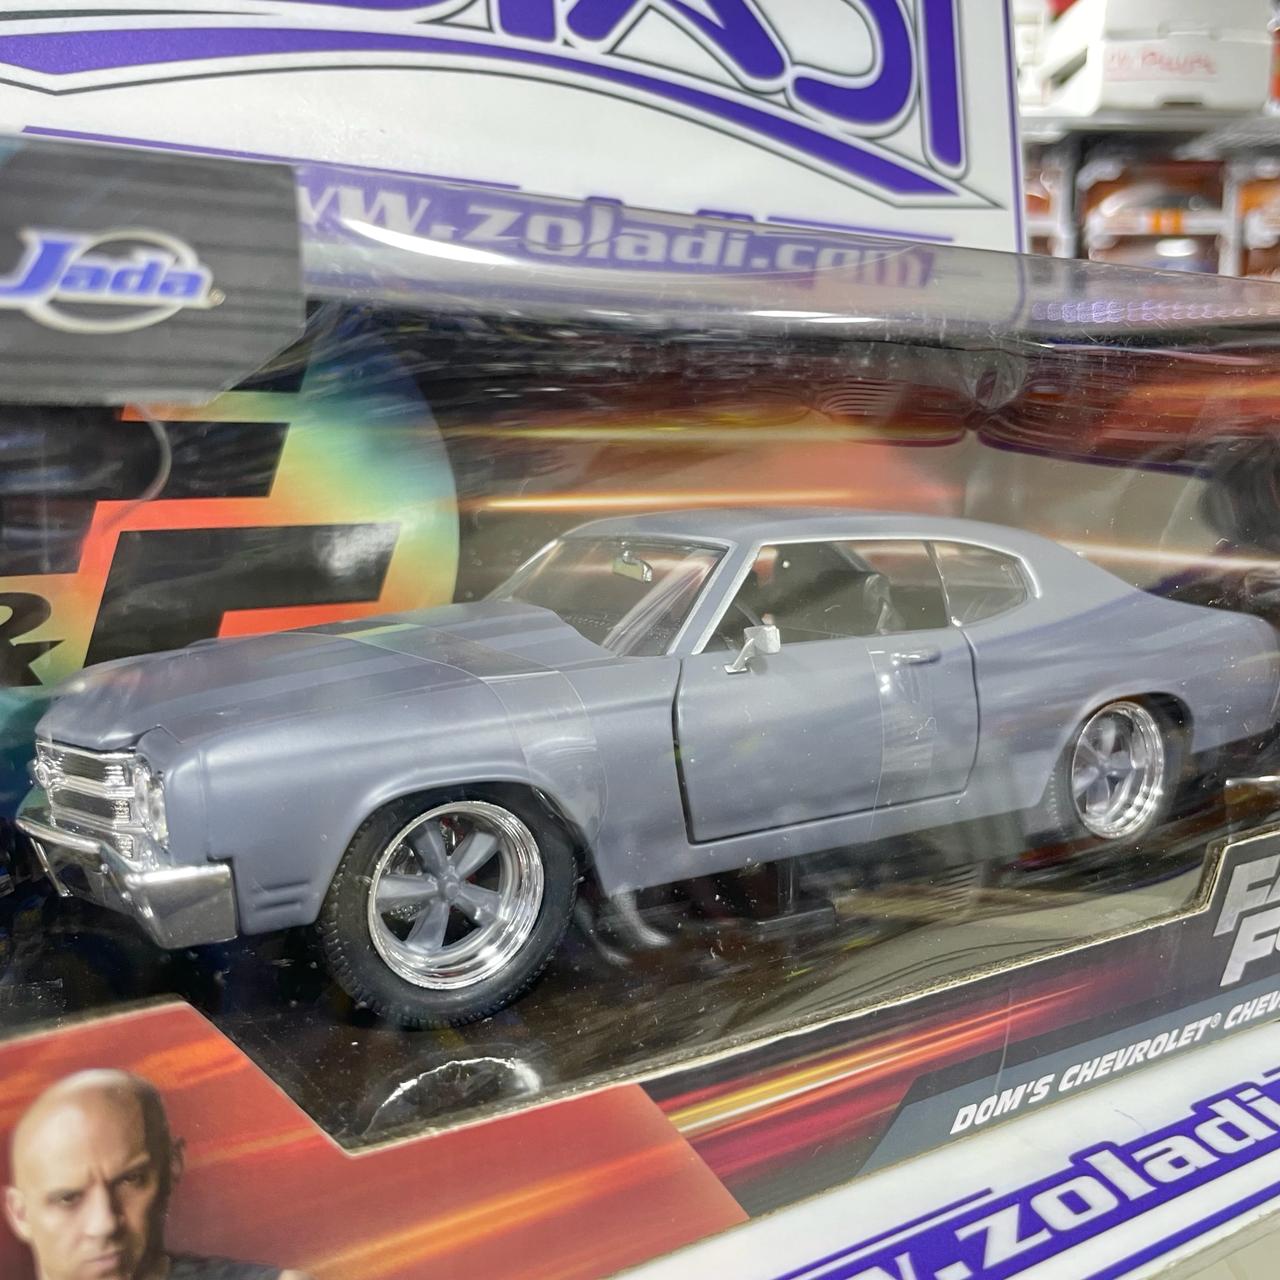 Fast&Furious DOMS CHEVROLET CHEVELLE SS  1/24 97835